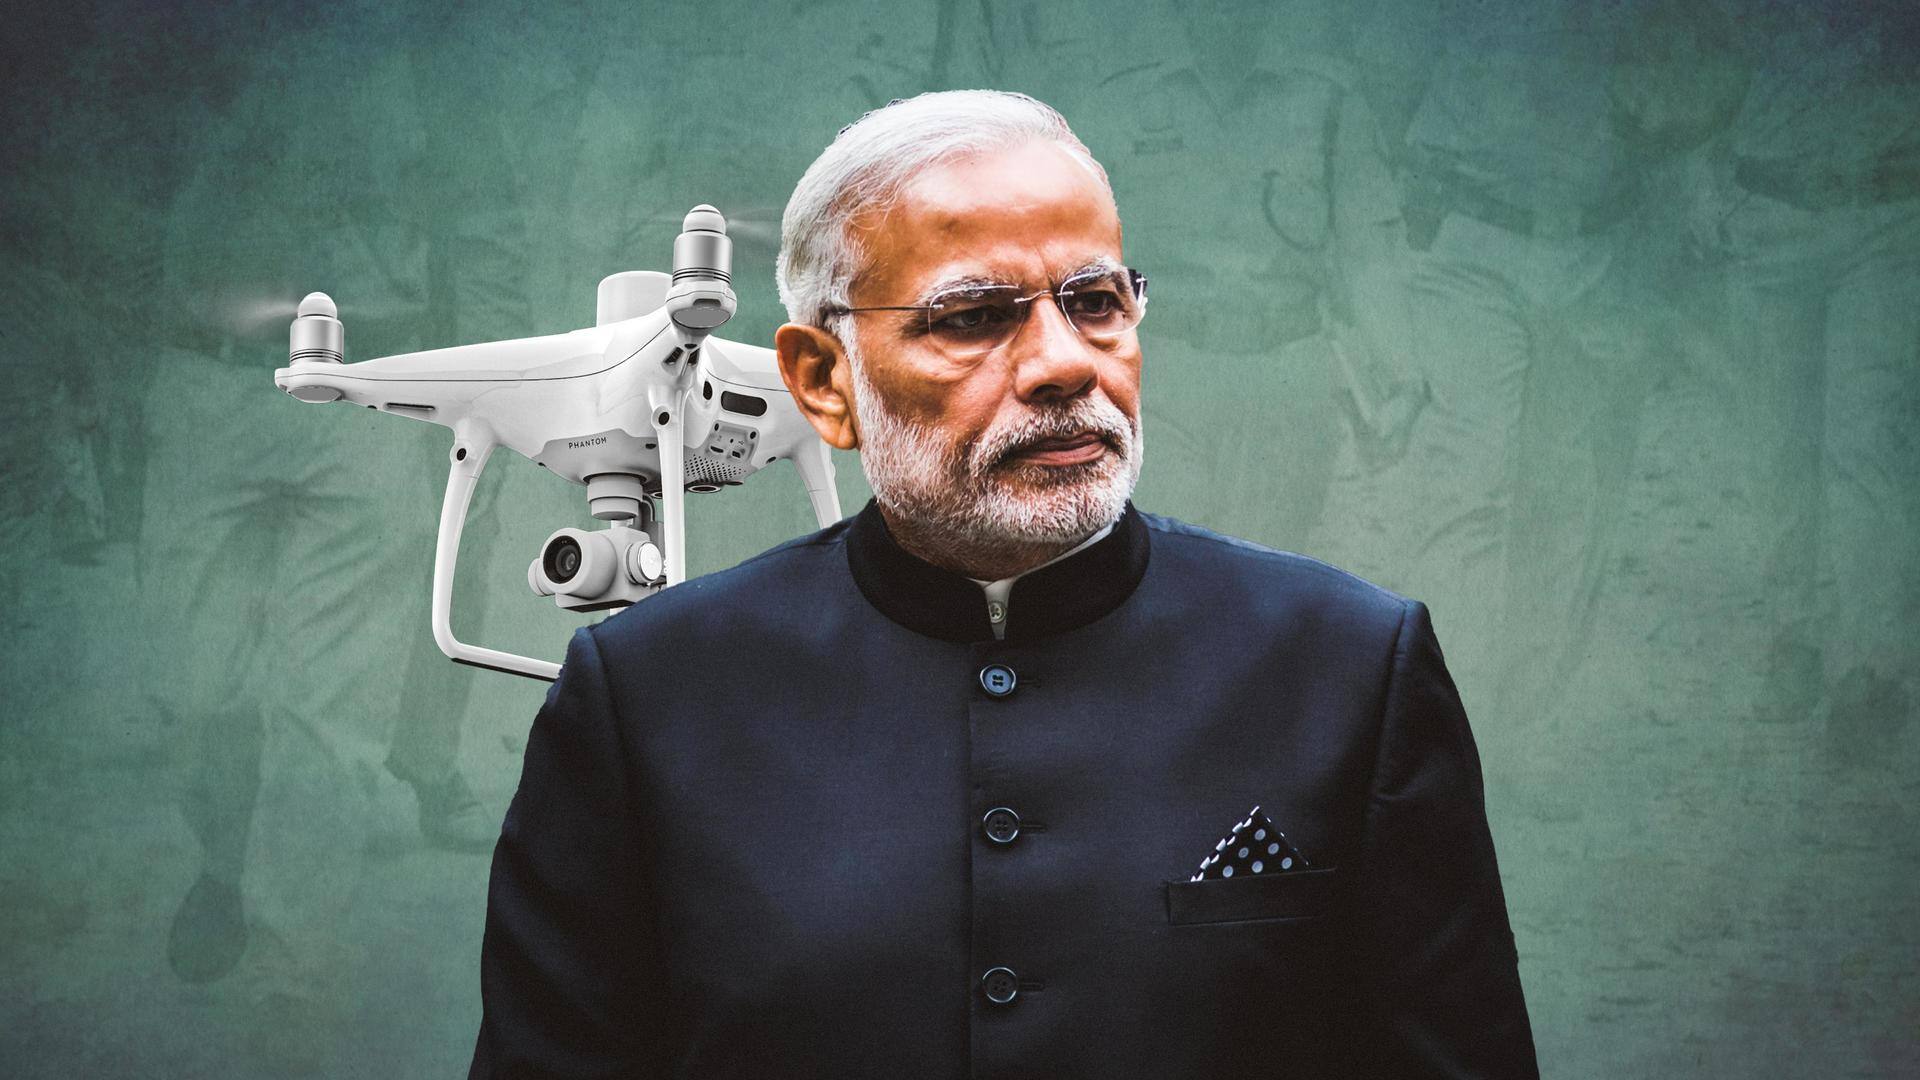 Drone spotted over PM Modi's residence, police probe underway: Report